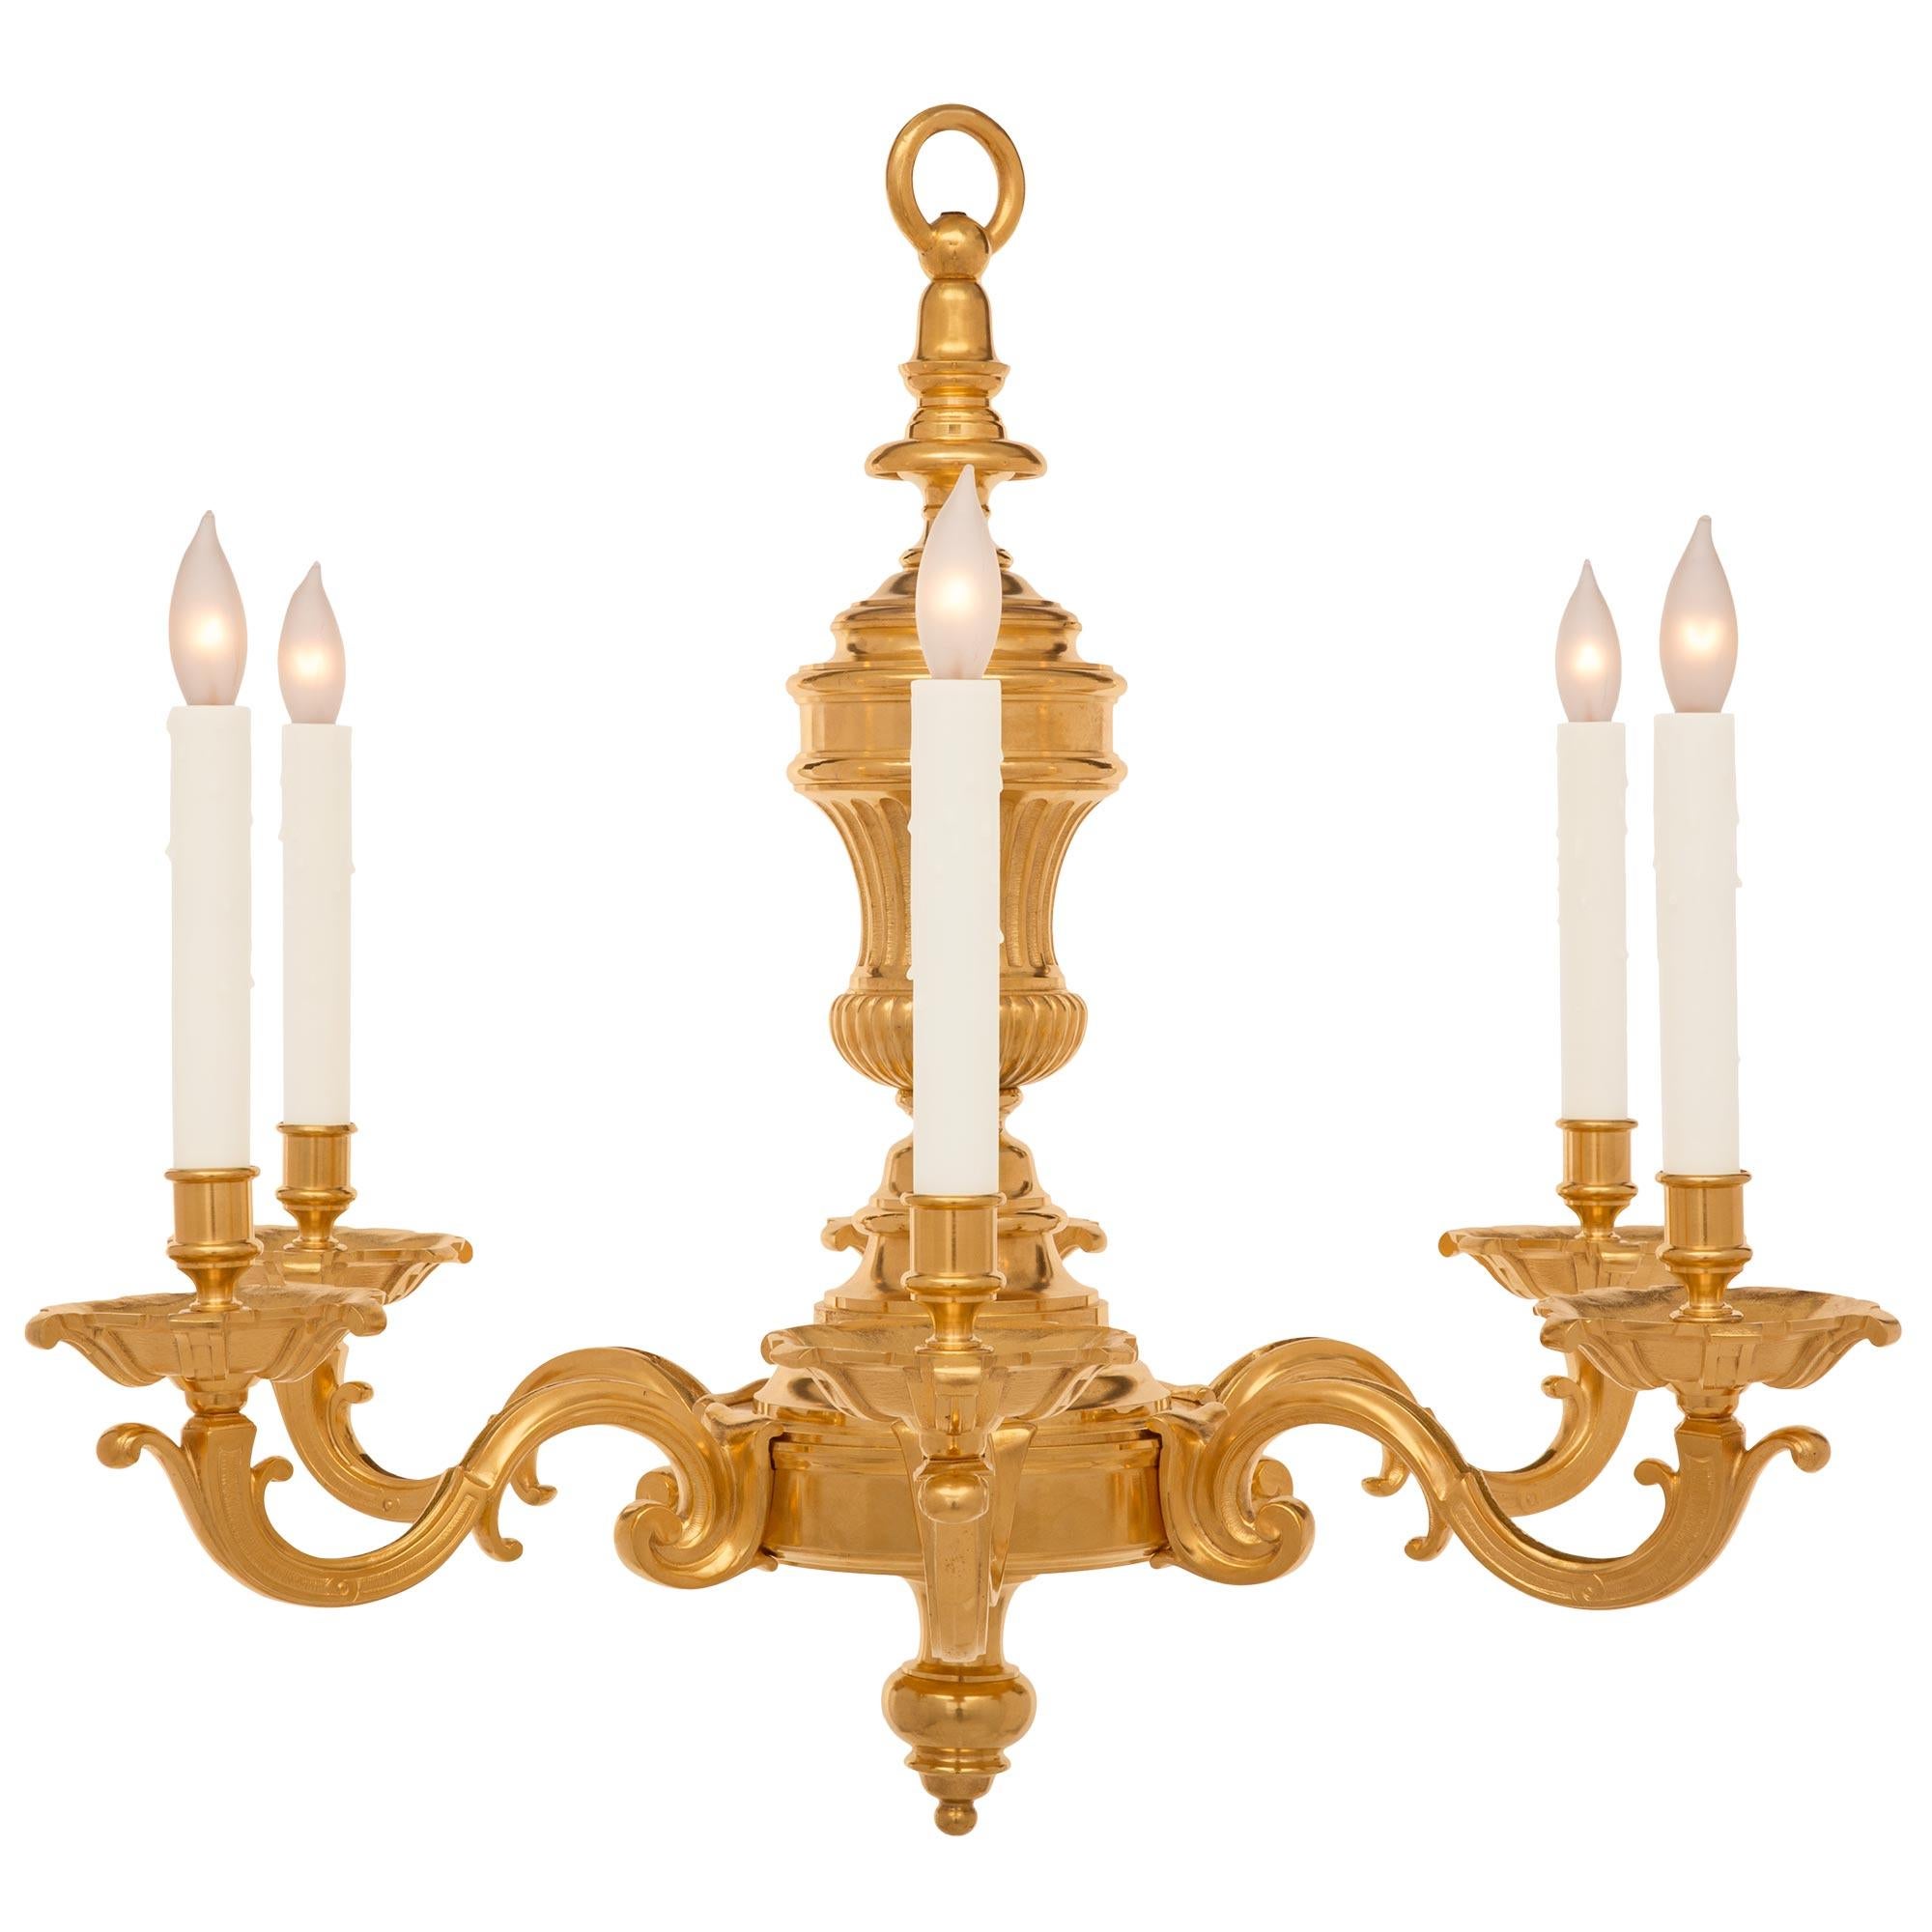 A most elegant French 19th Louis XVI st. ormolu chandelier. The six arm chandelier is centered by a lovely mottled topie shaped bottom finial. The body displays a decorative stepped and mottled design from where the elegantly scrolled arms branch